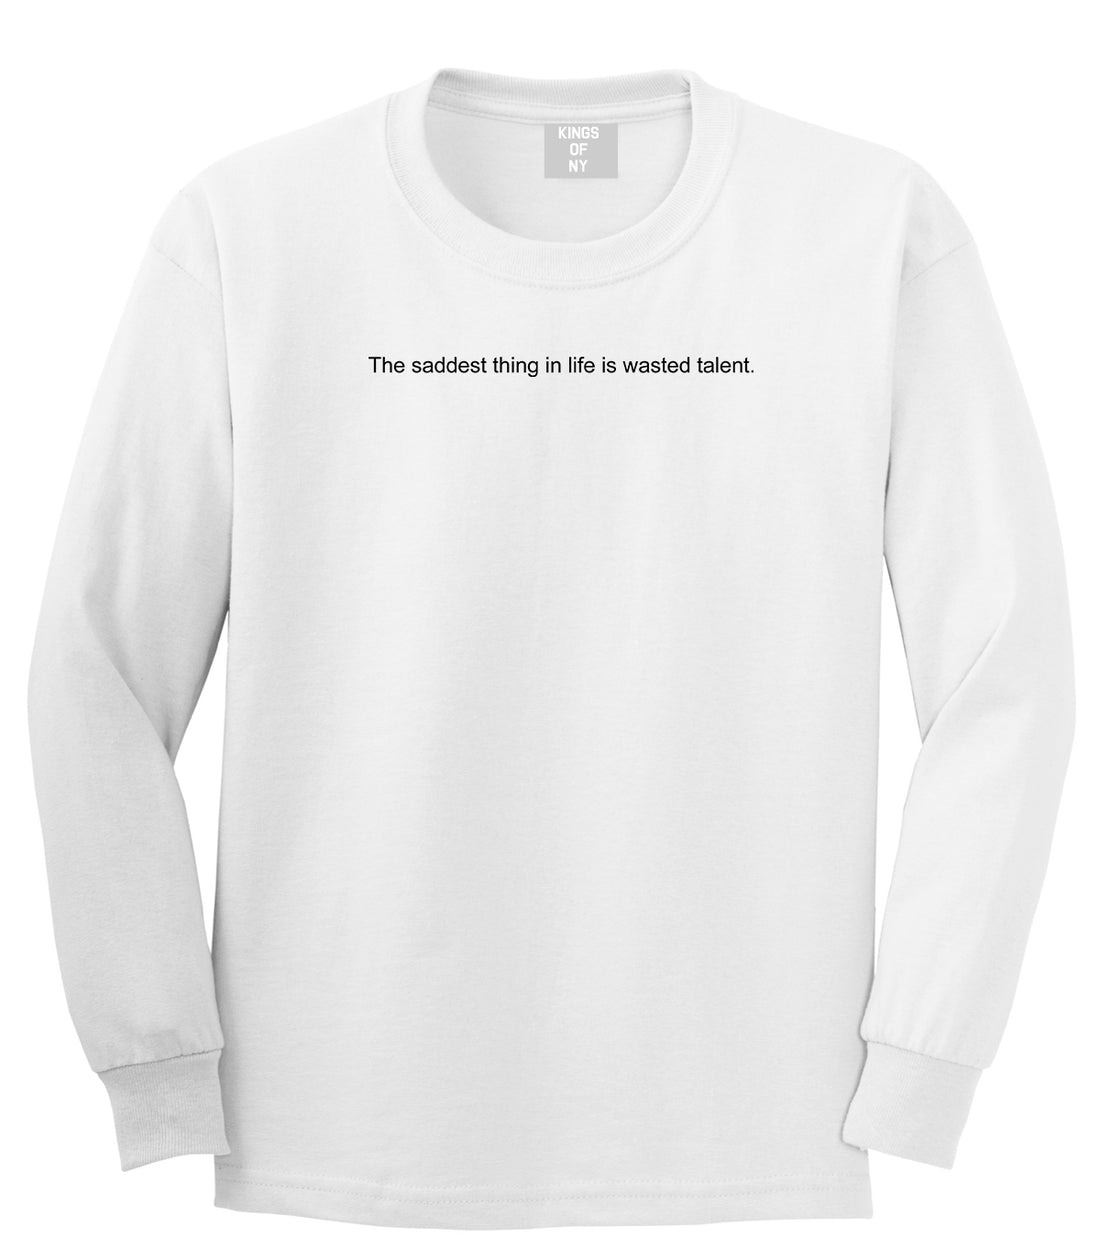 The Saddest Thing In Life Is Wasted Talent Mens Long Sleeve T-Shirt White